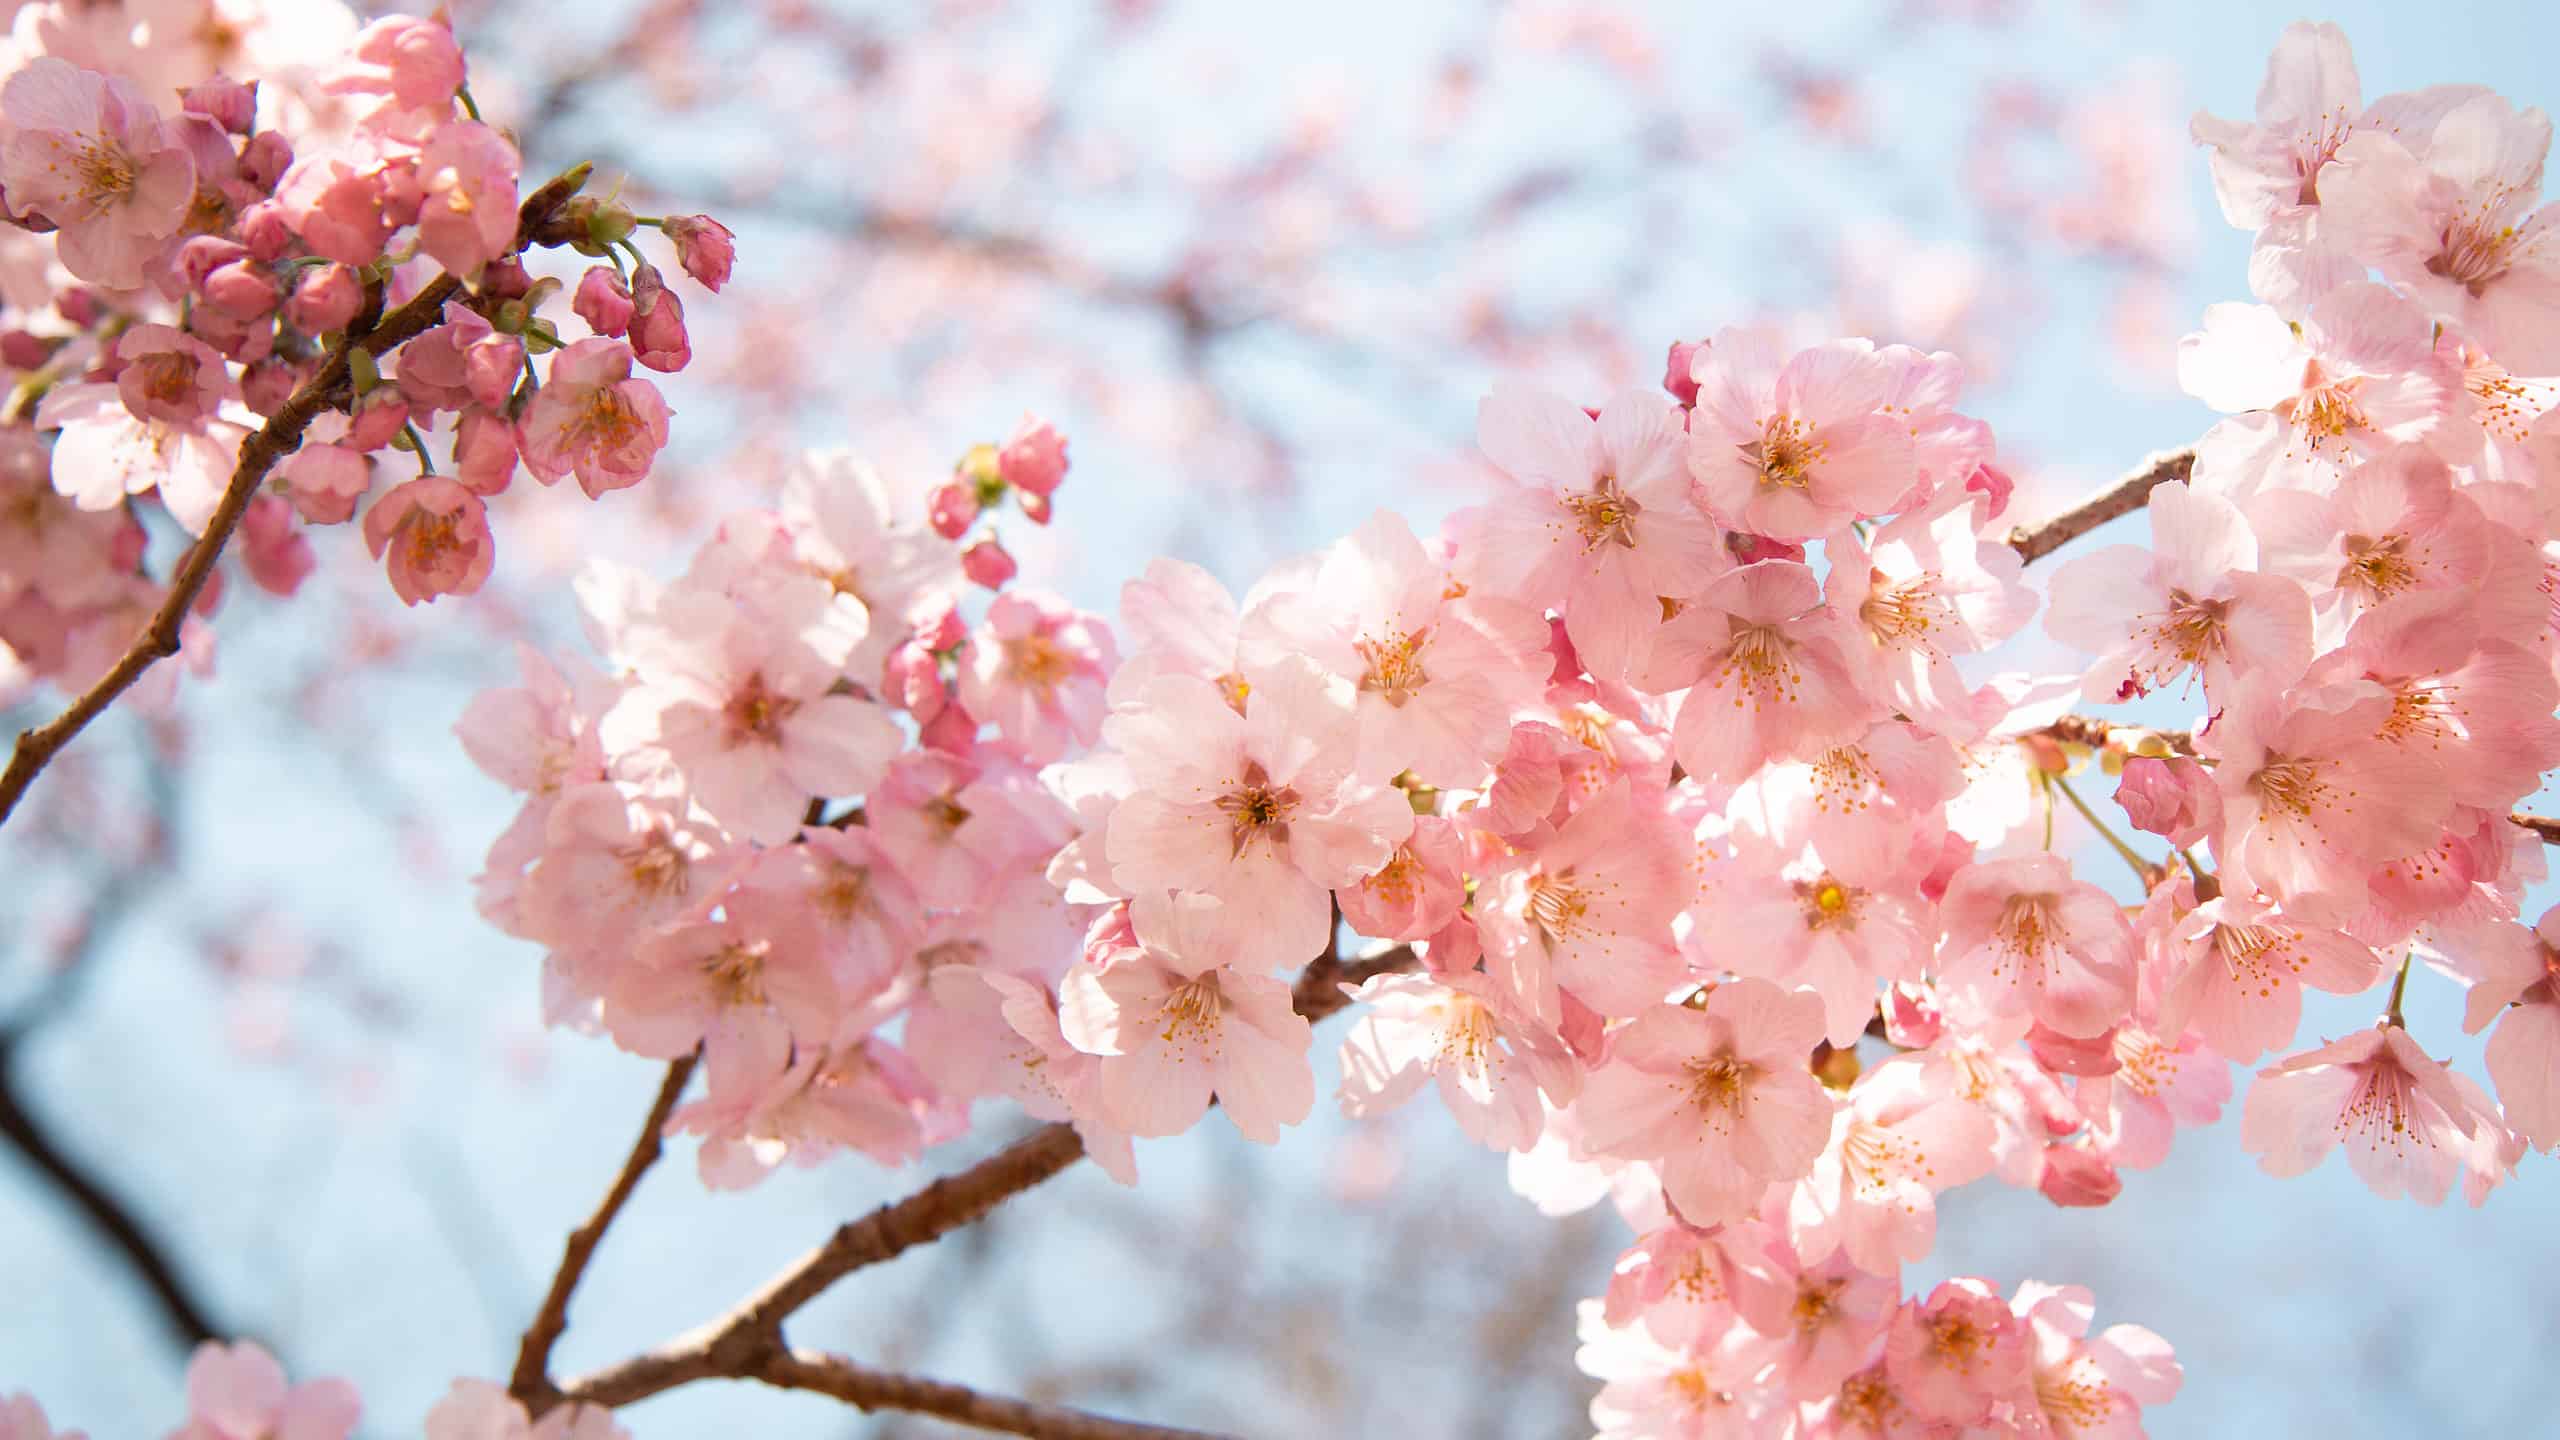 10 Amazing Facts About Cherry Blossoms